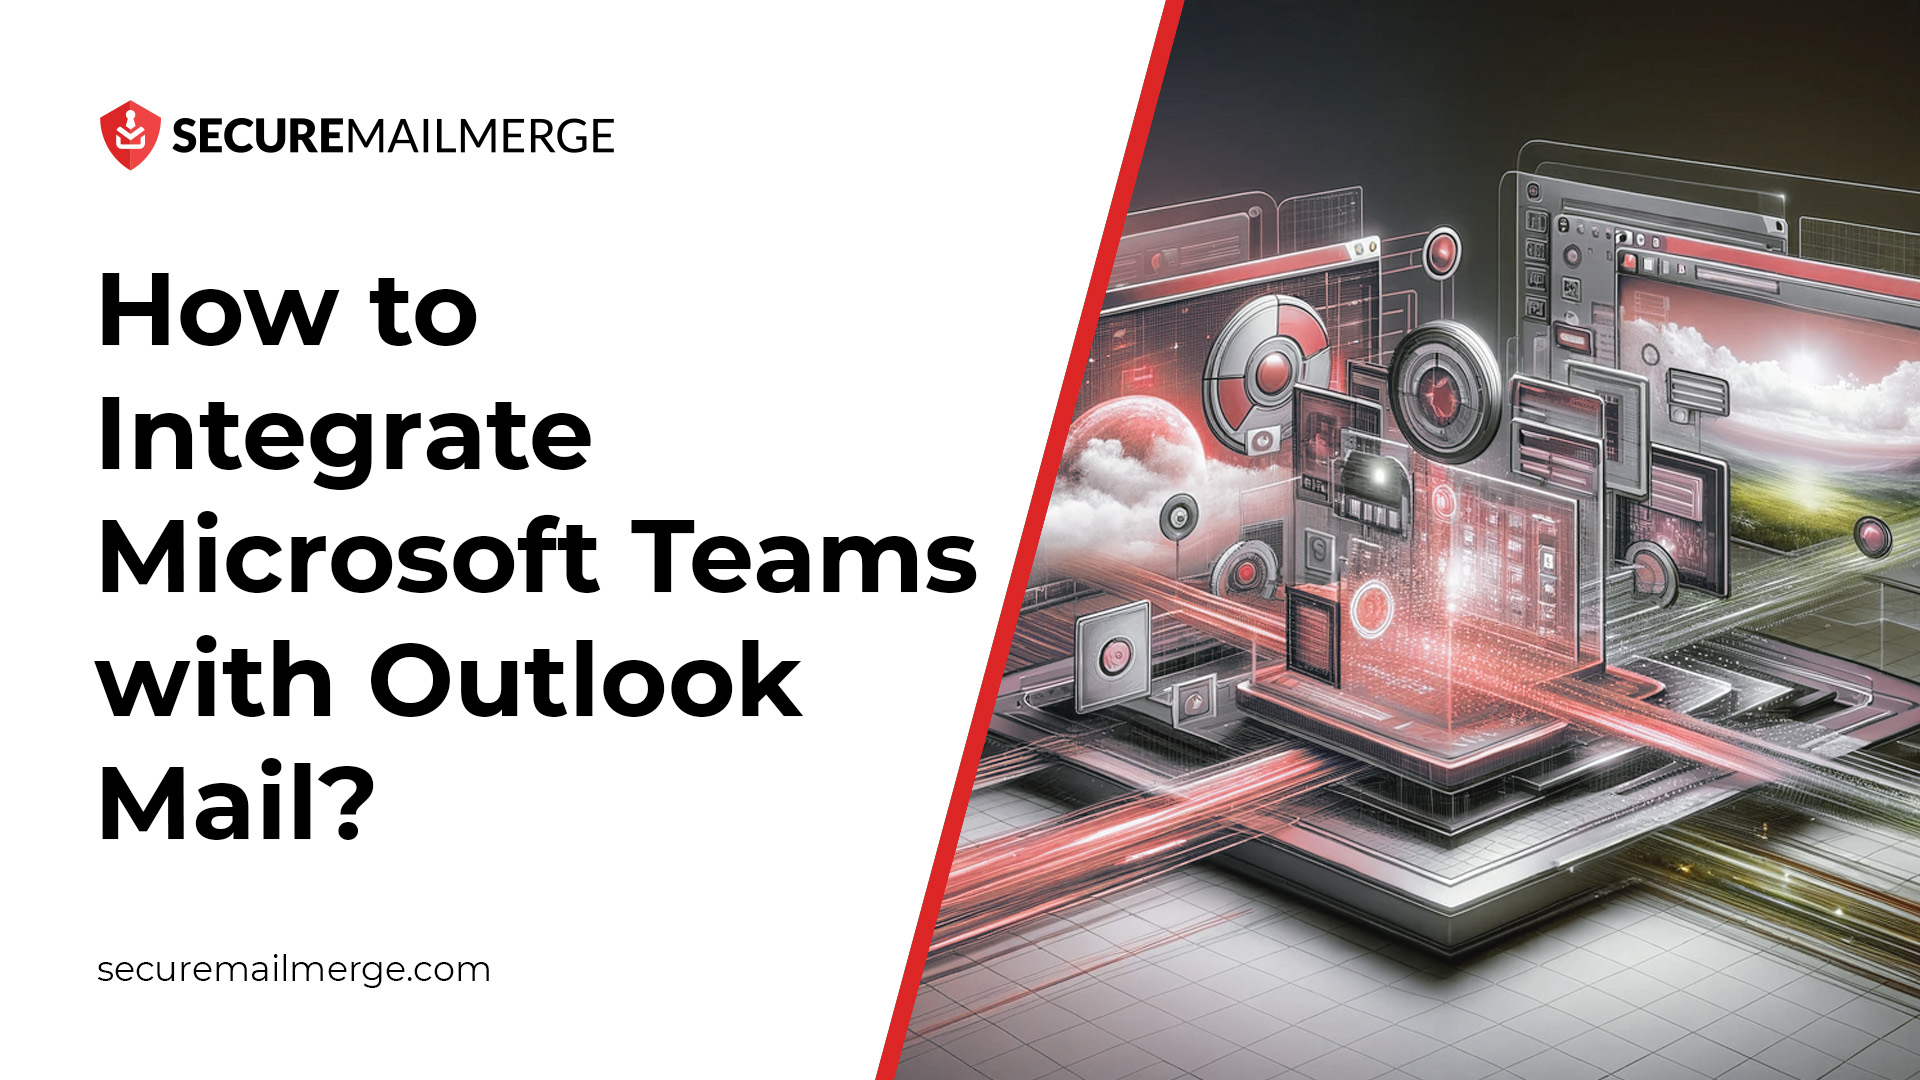 How to Integrate Microsoft Teams with Outlook Mail?